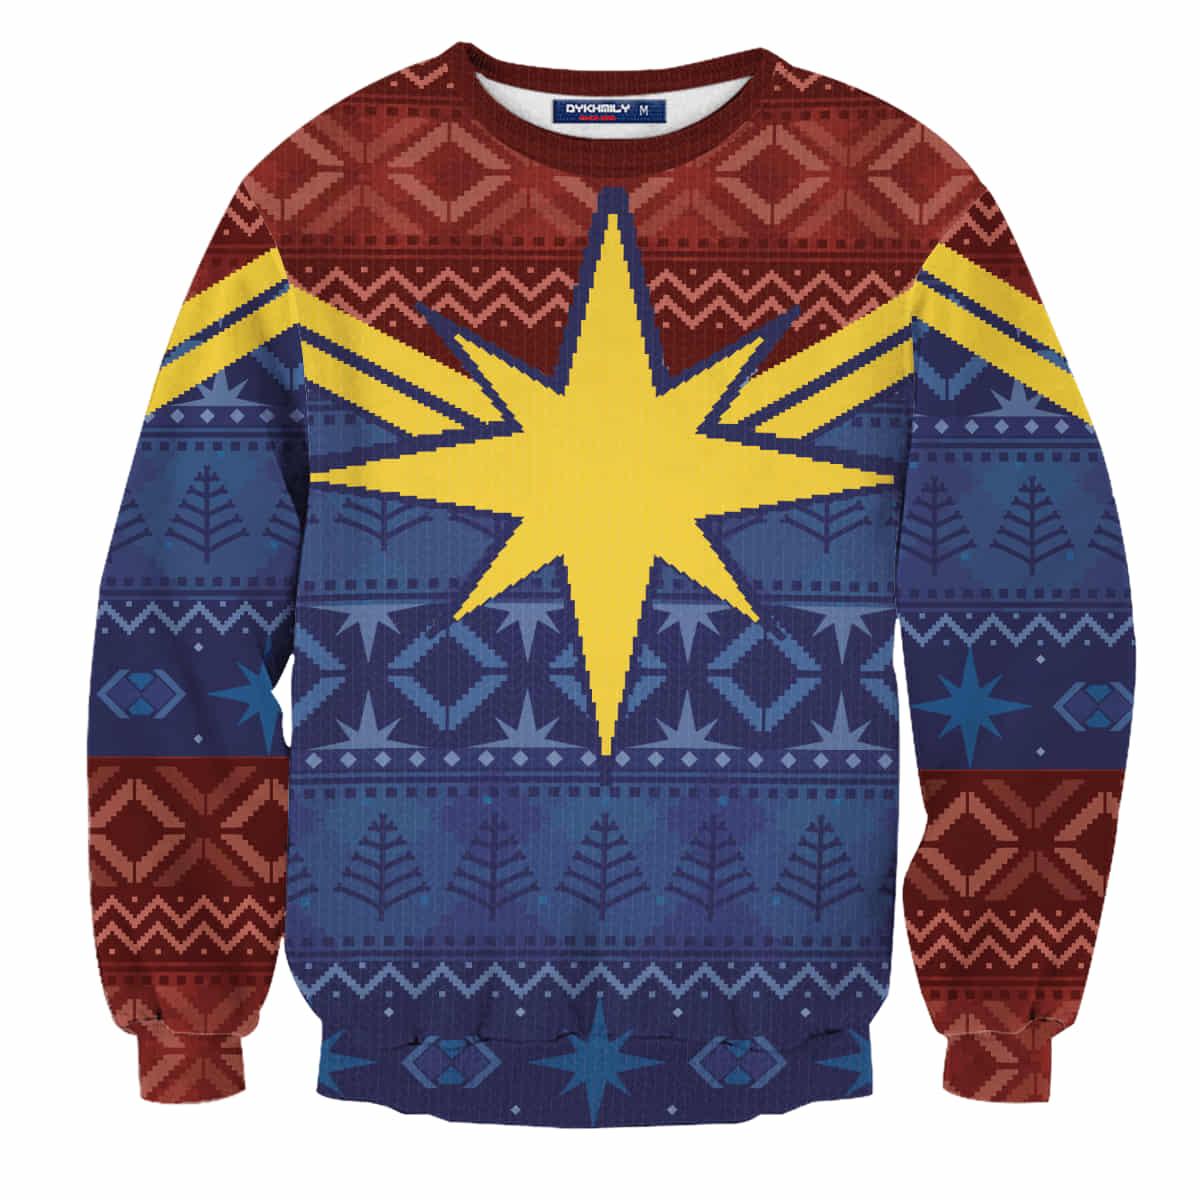 Captain Marvel Wool Knitted Sweater, Protector Of Skies Christmas 3D Sweater